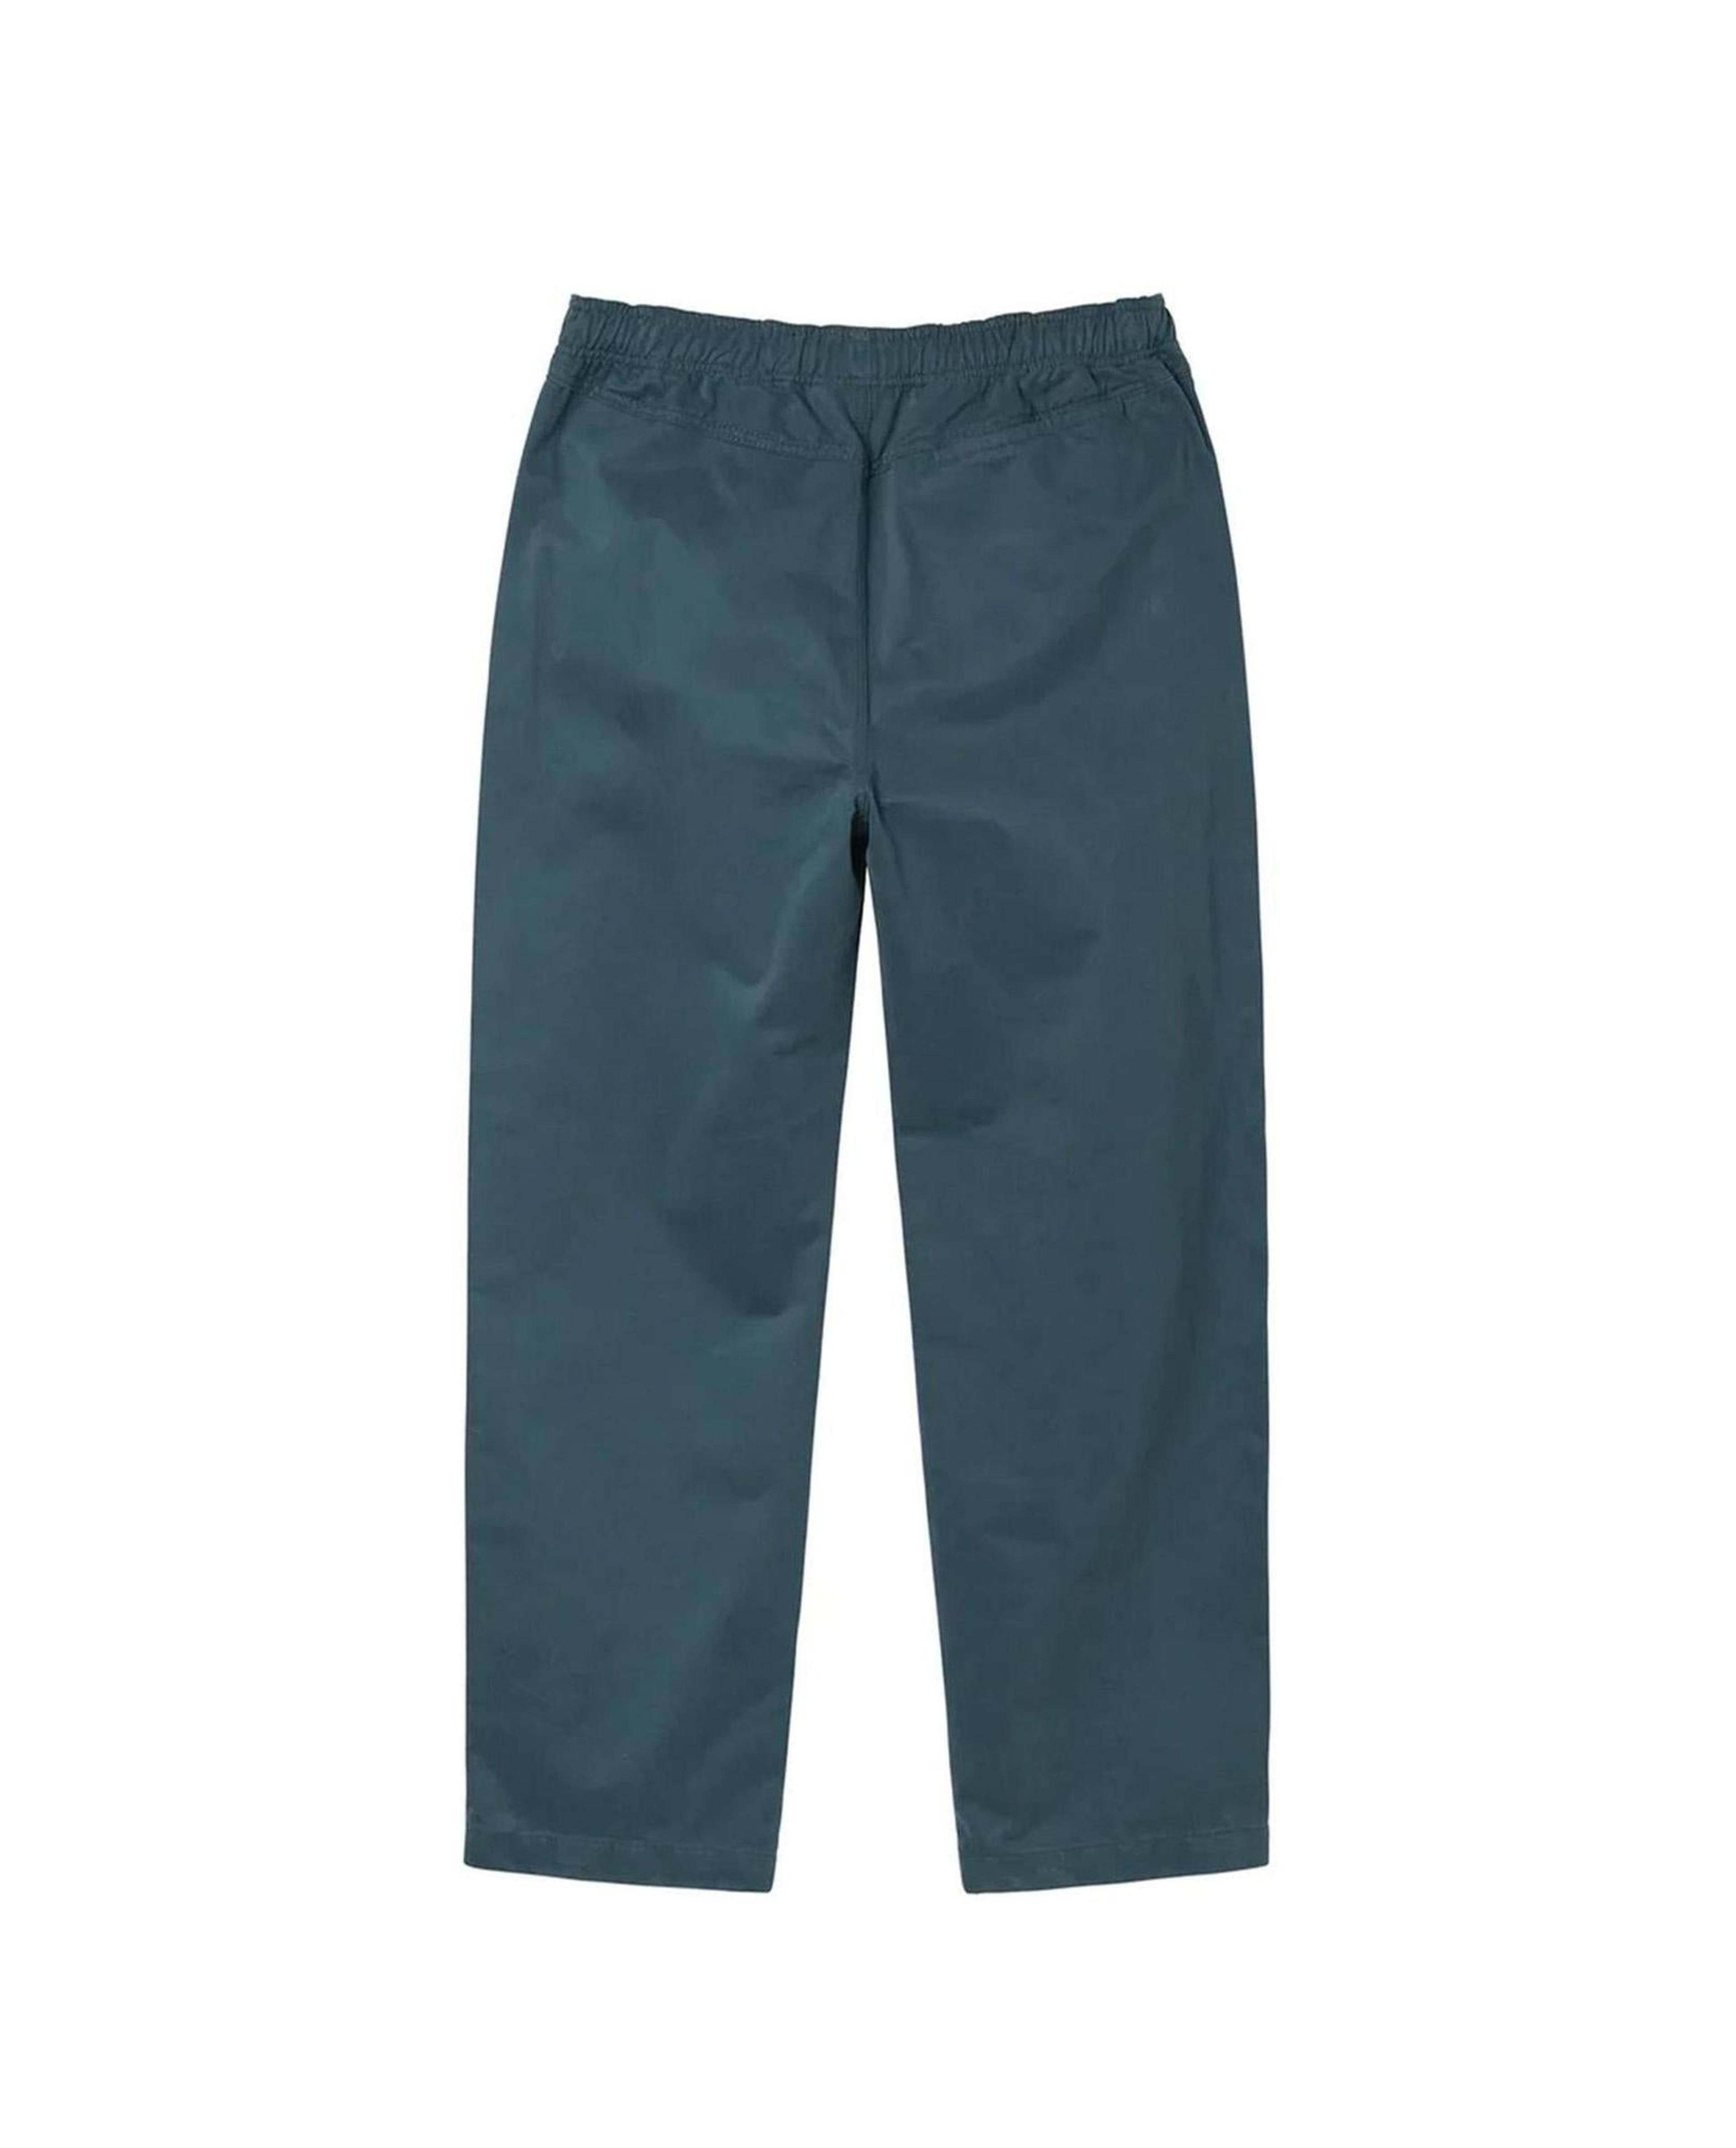 Alternate View 7 of Stussy Brushed Beach Pant